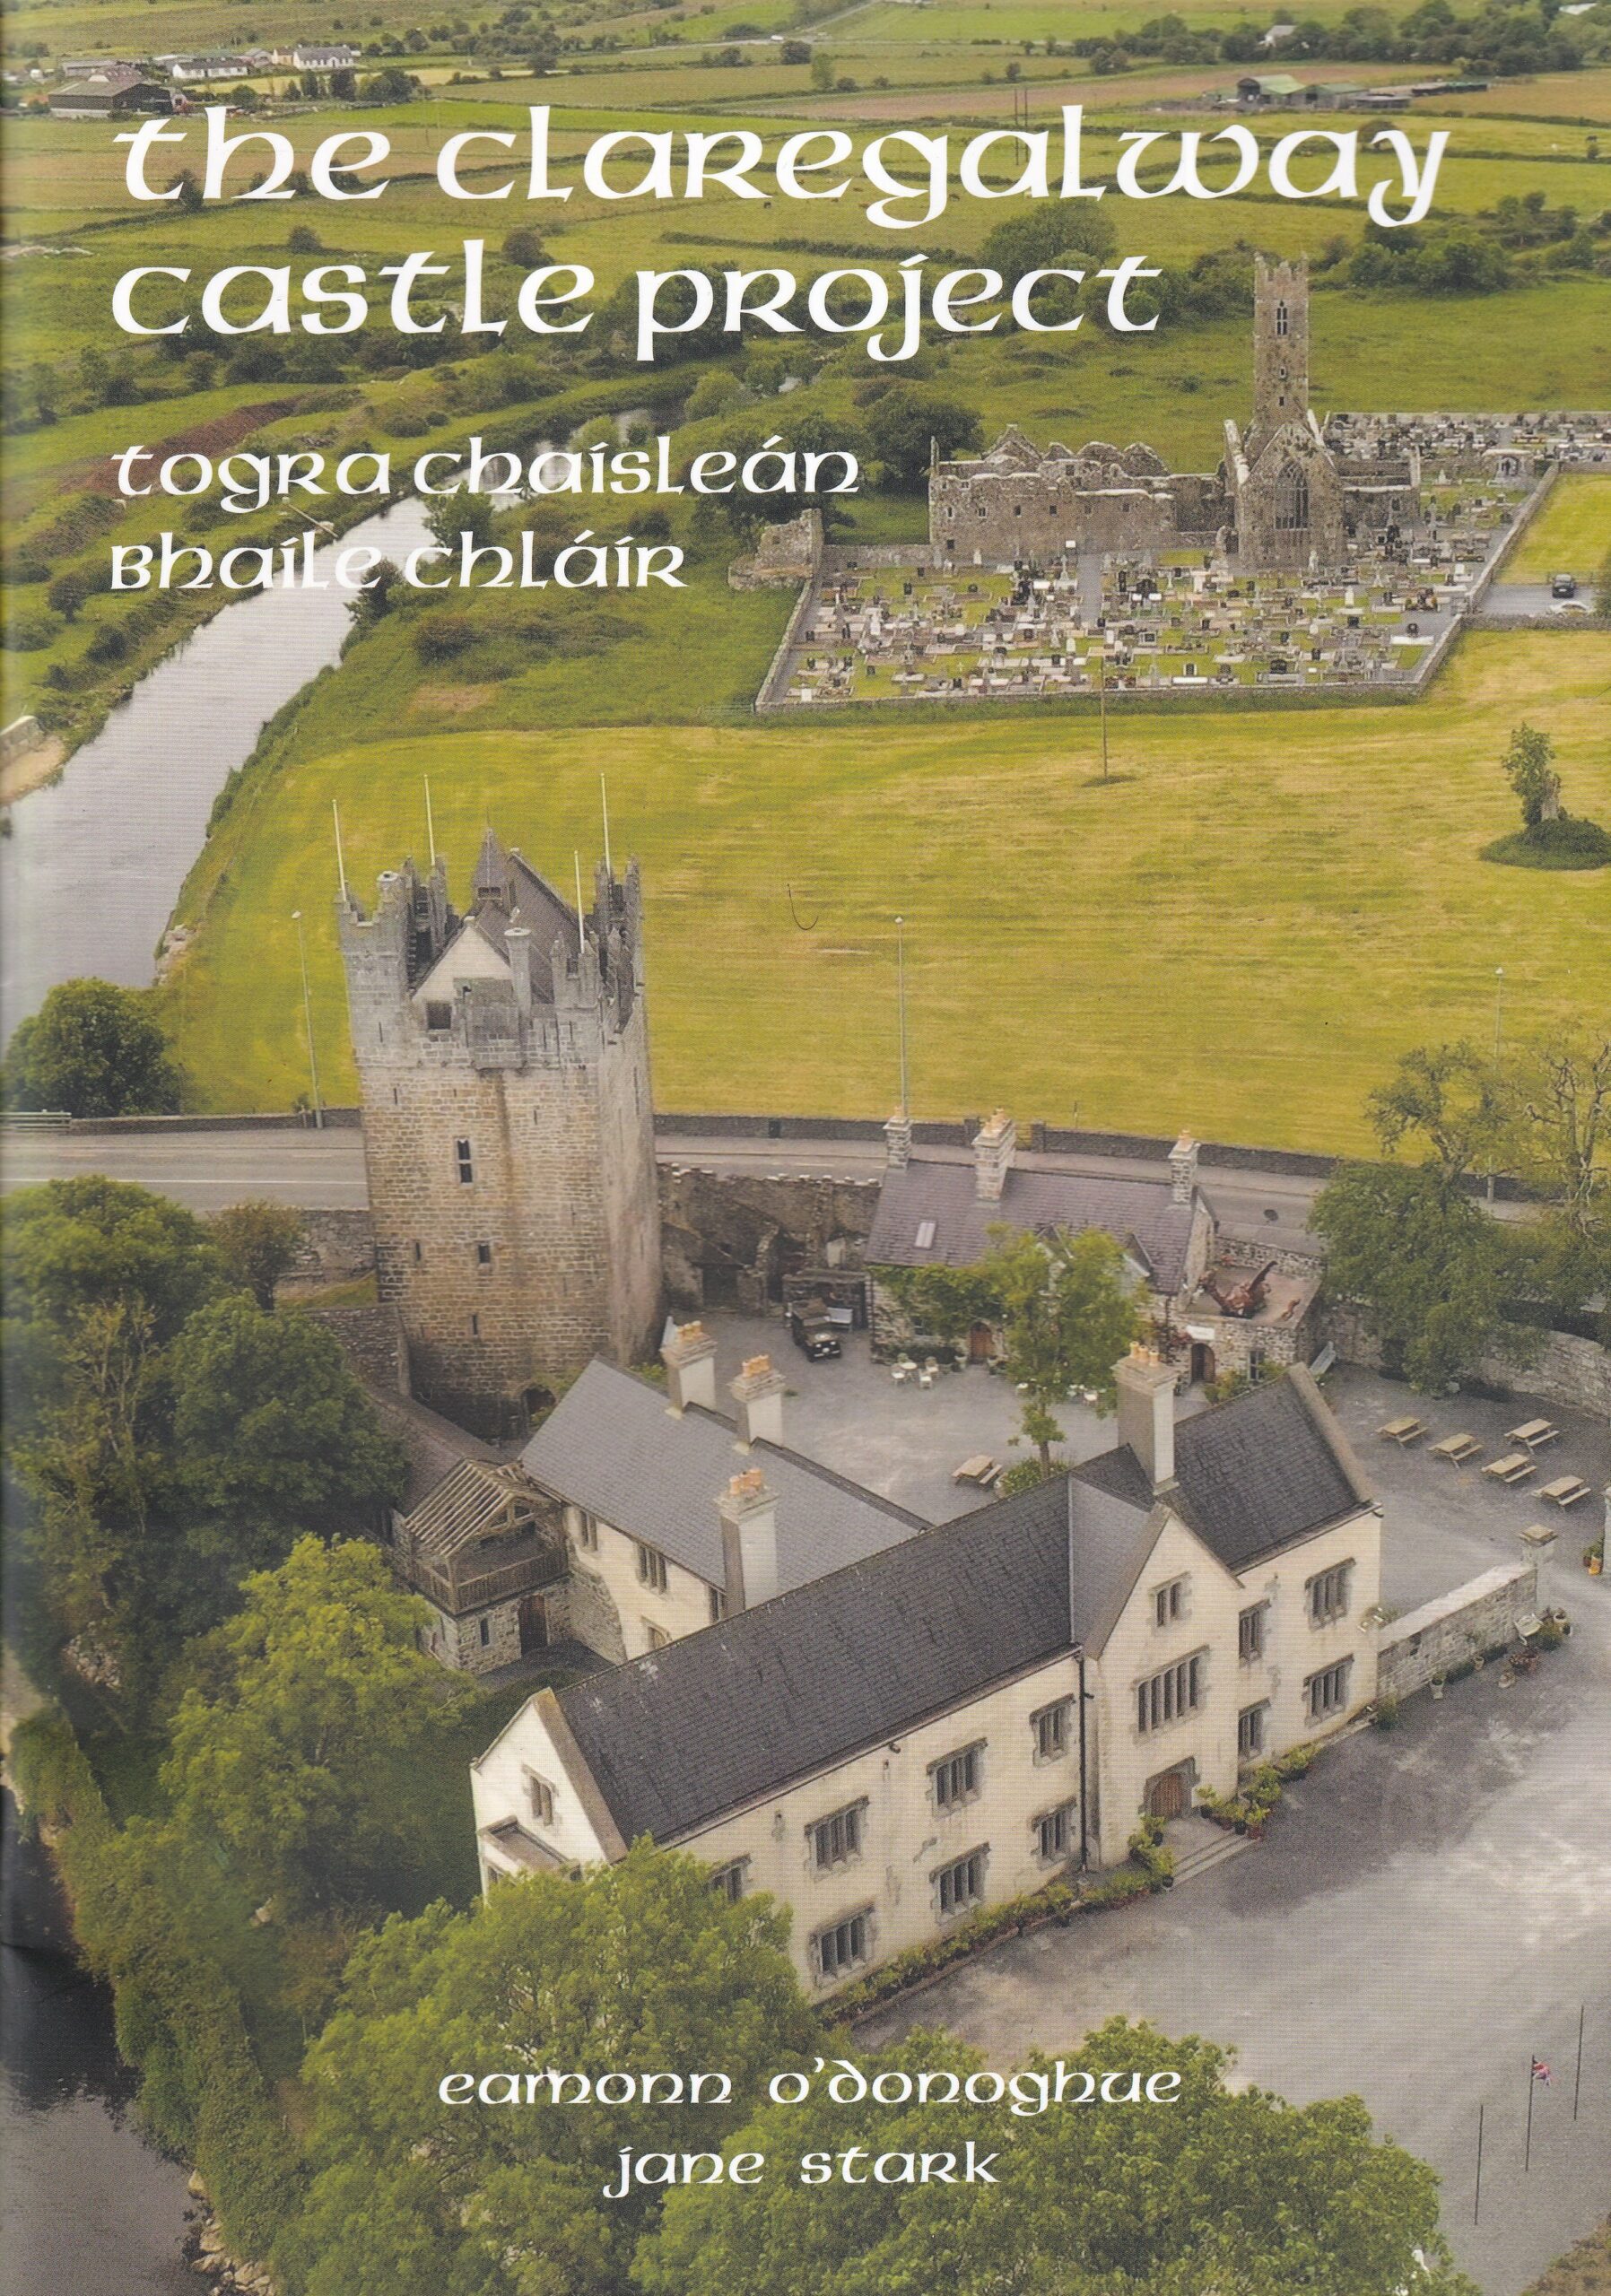 The Claregalway Castle Project by Eamonn O'Donoghue and Jane Stark